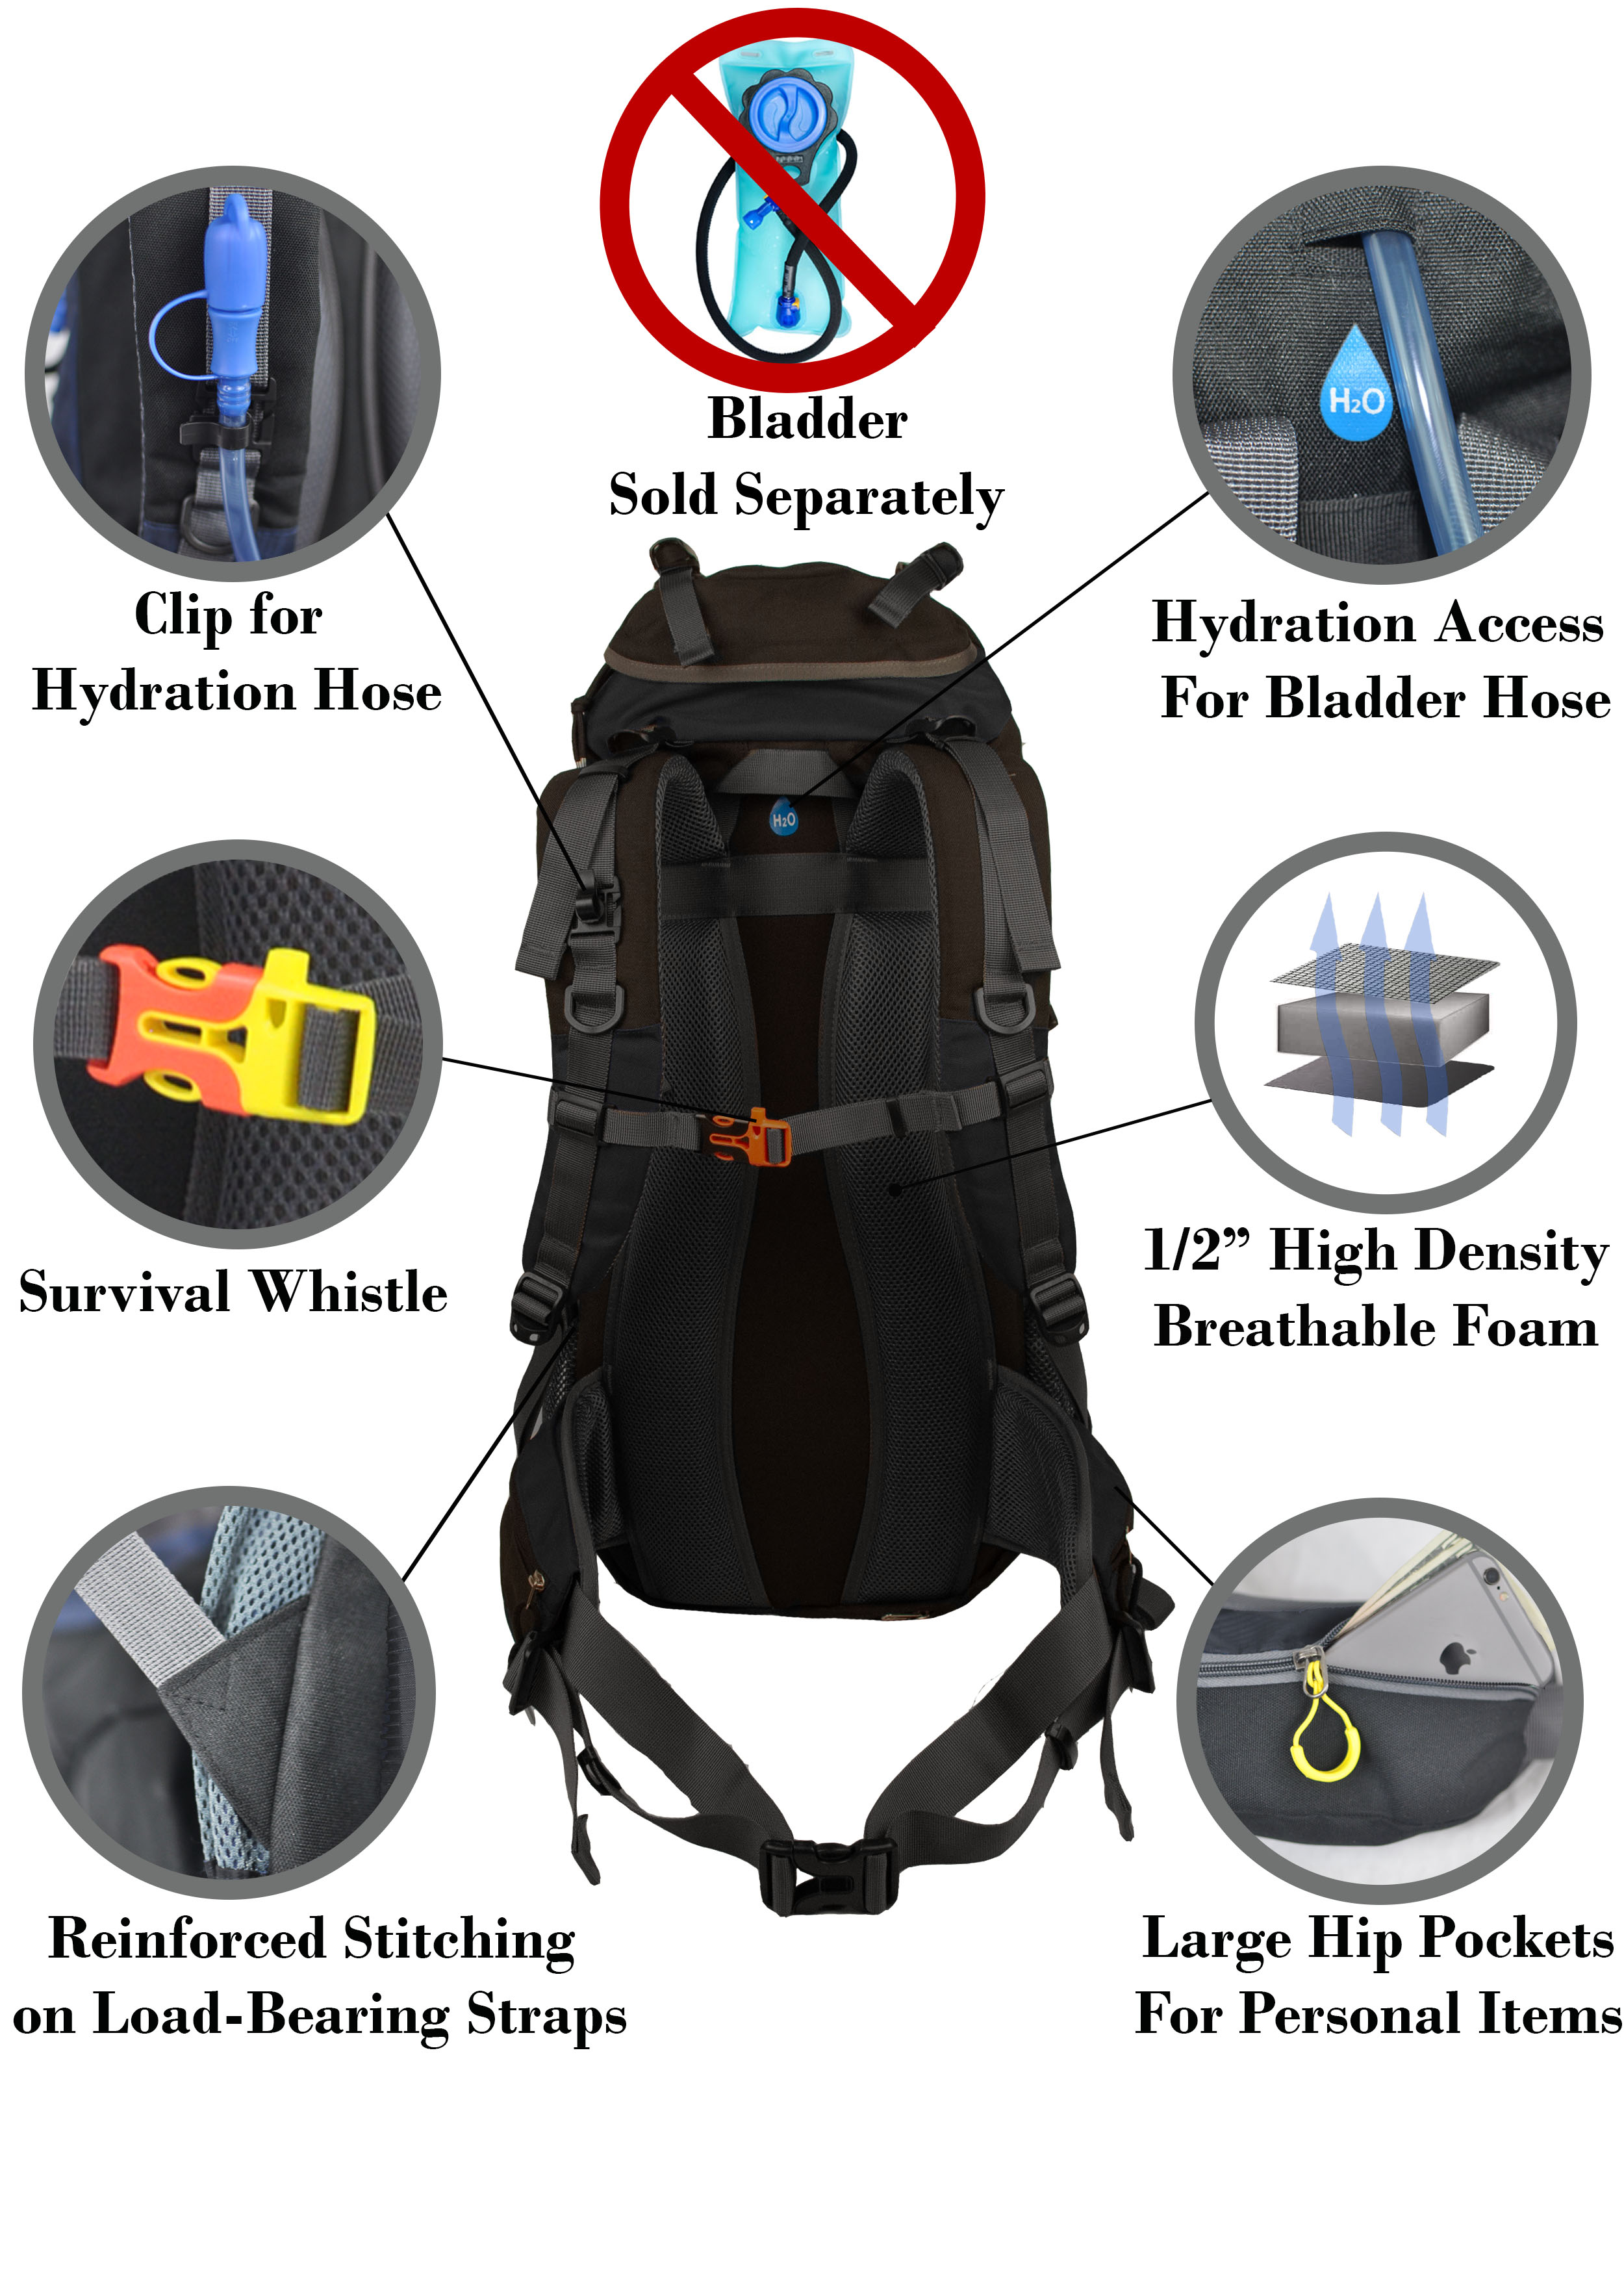 Duraton Hiking Backpack 50L with Rain Cover for Backpacking or Camping; Fits Men and Women (Black) - image 5 of 8